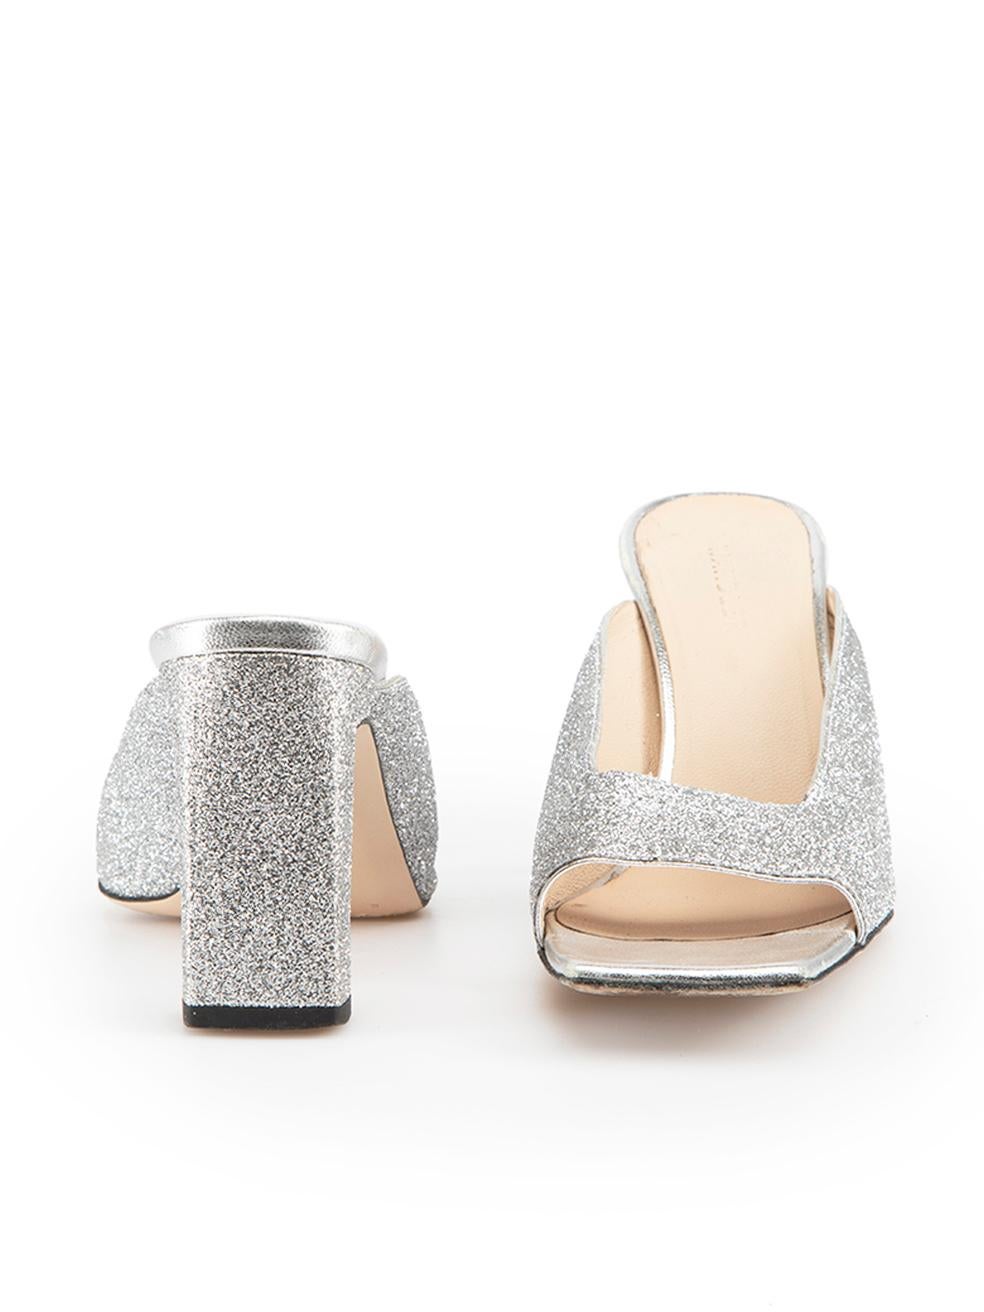 Wandler Silver Glitter Open Toe Heeled Mules Size IT 37 In Excellent Condition For Sale In London, GB